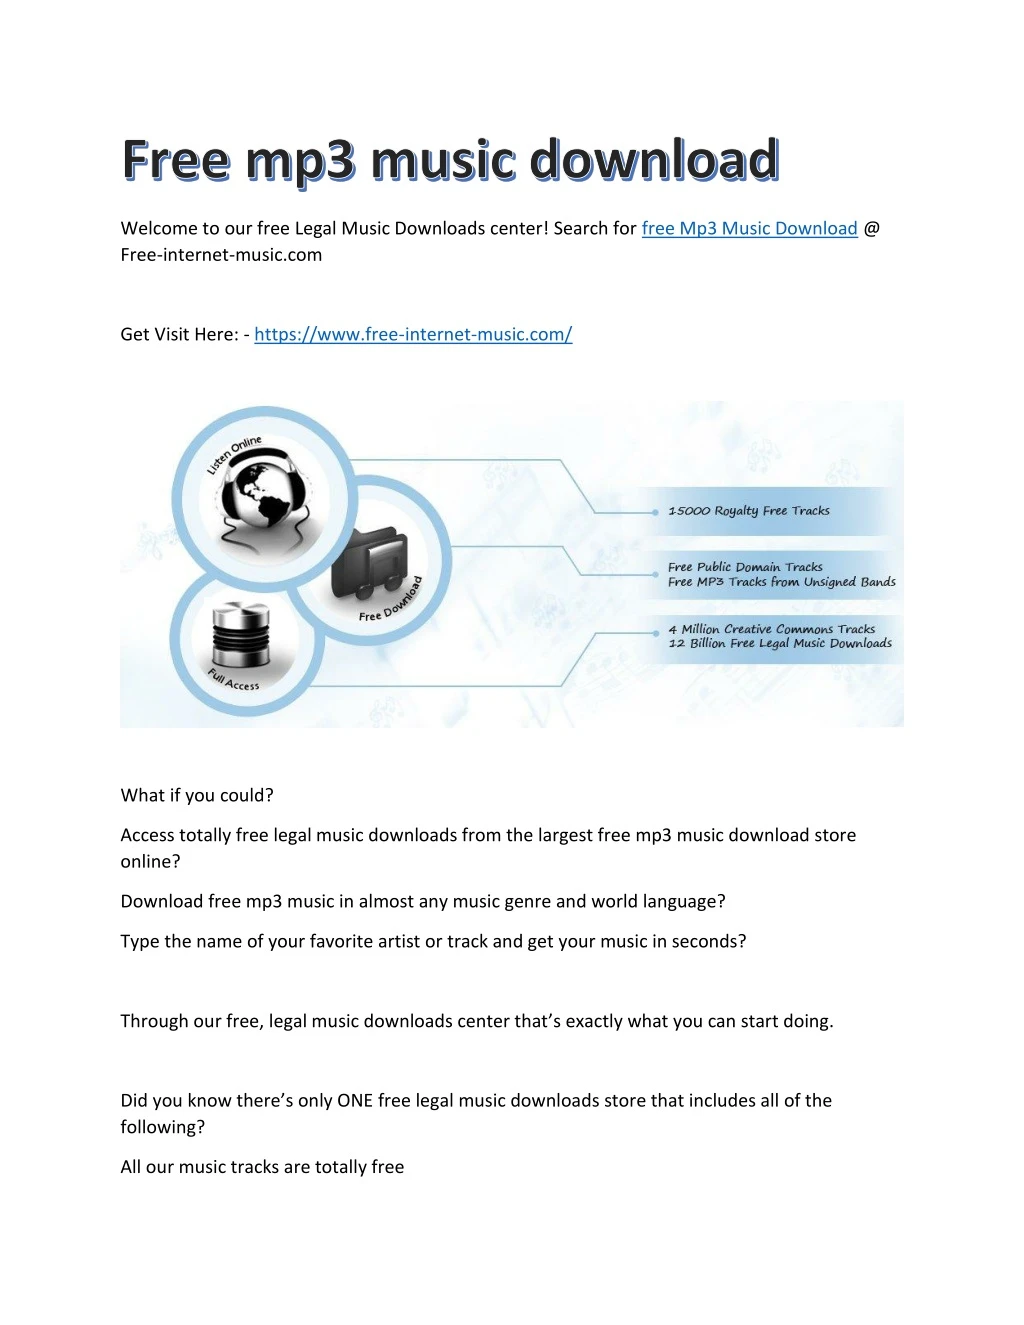 welcome to our free legal music downloads center